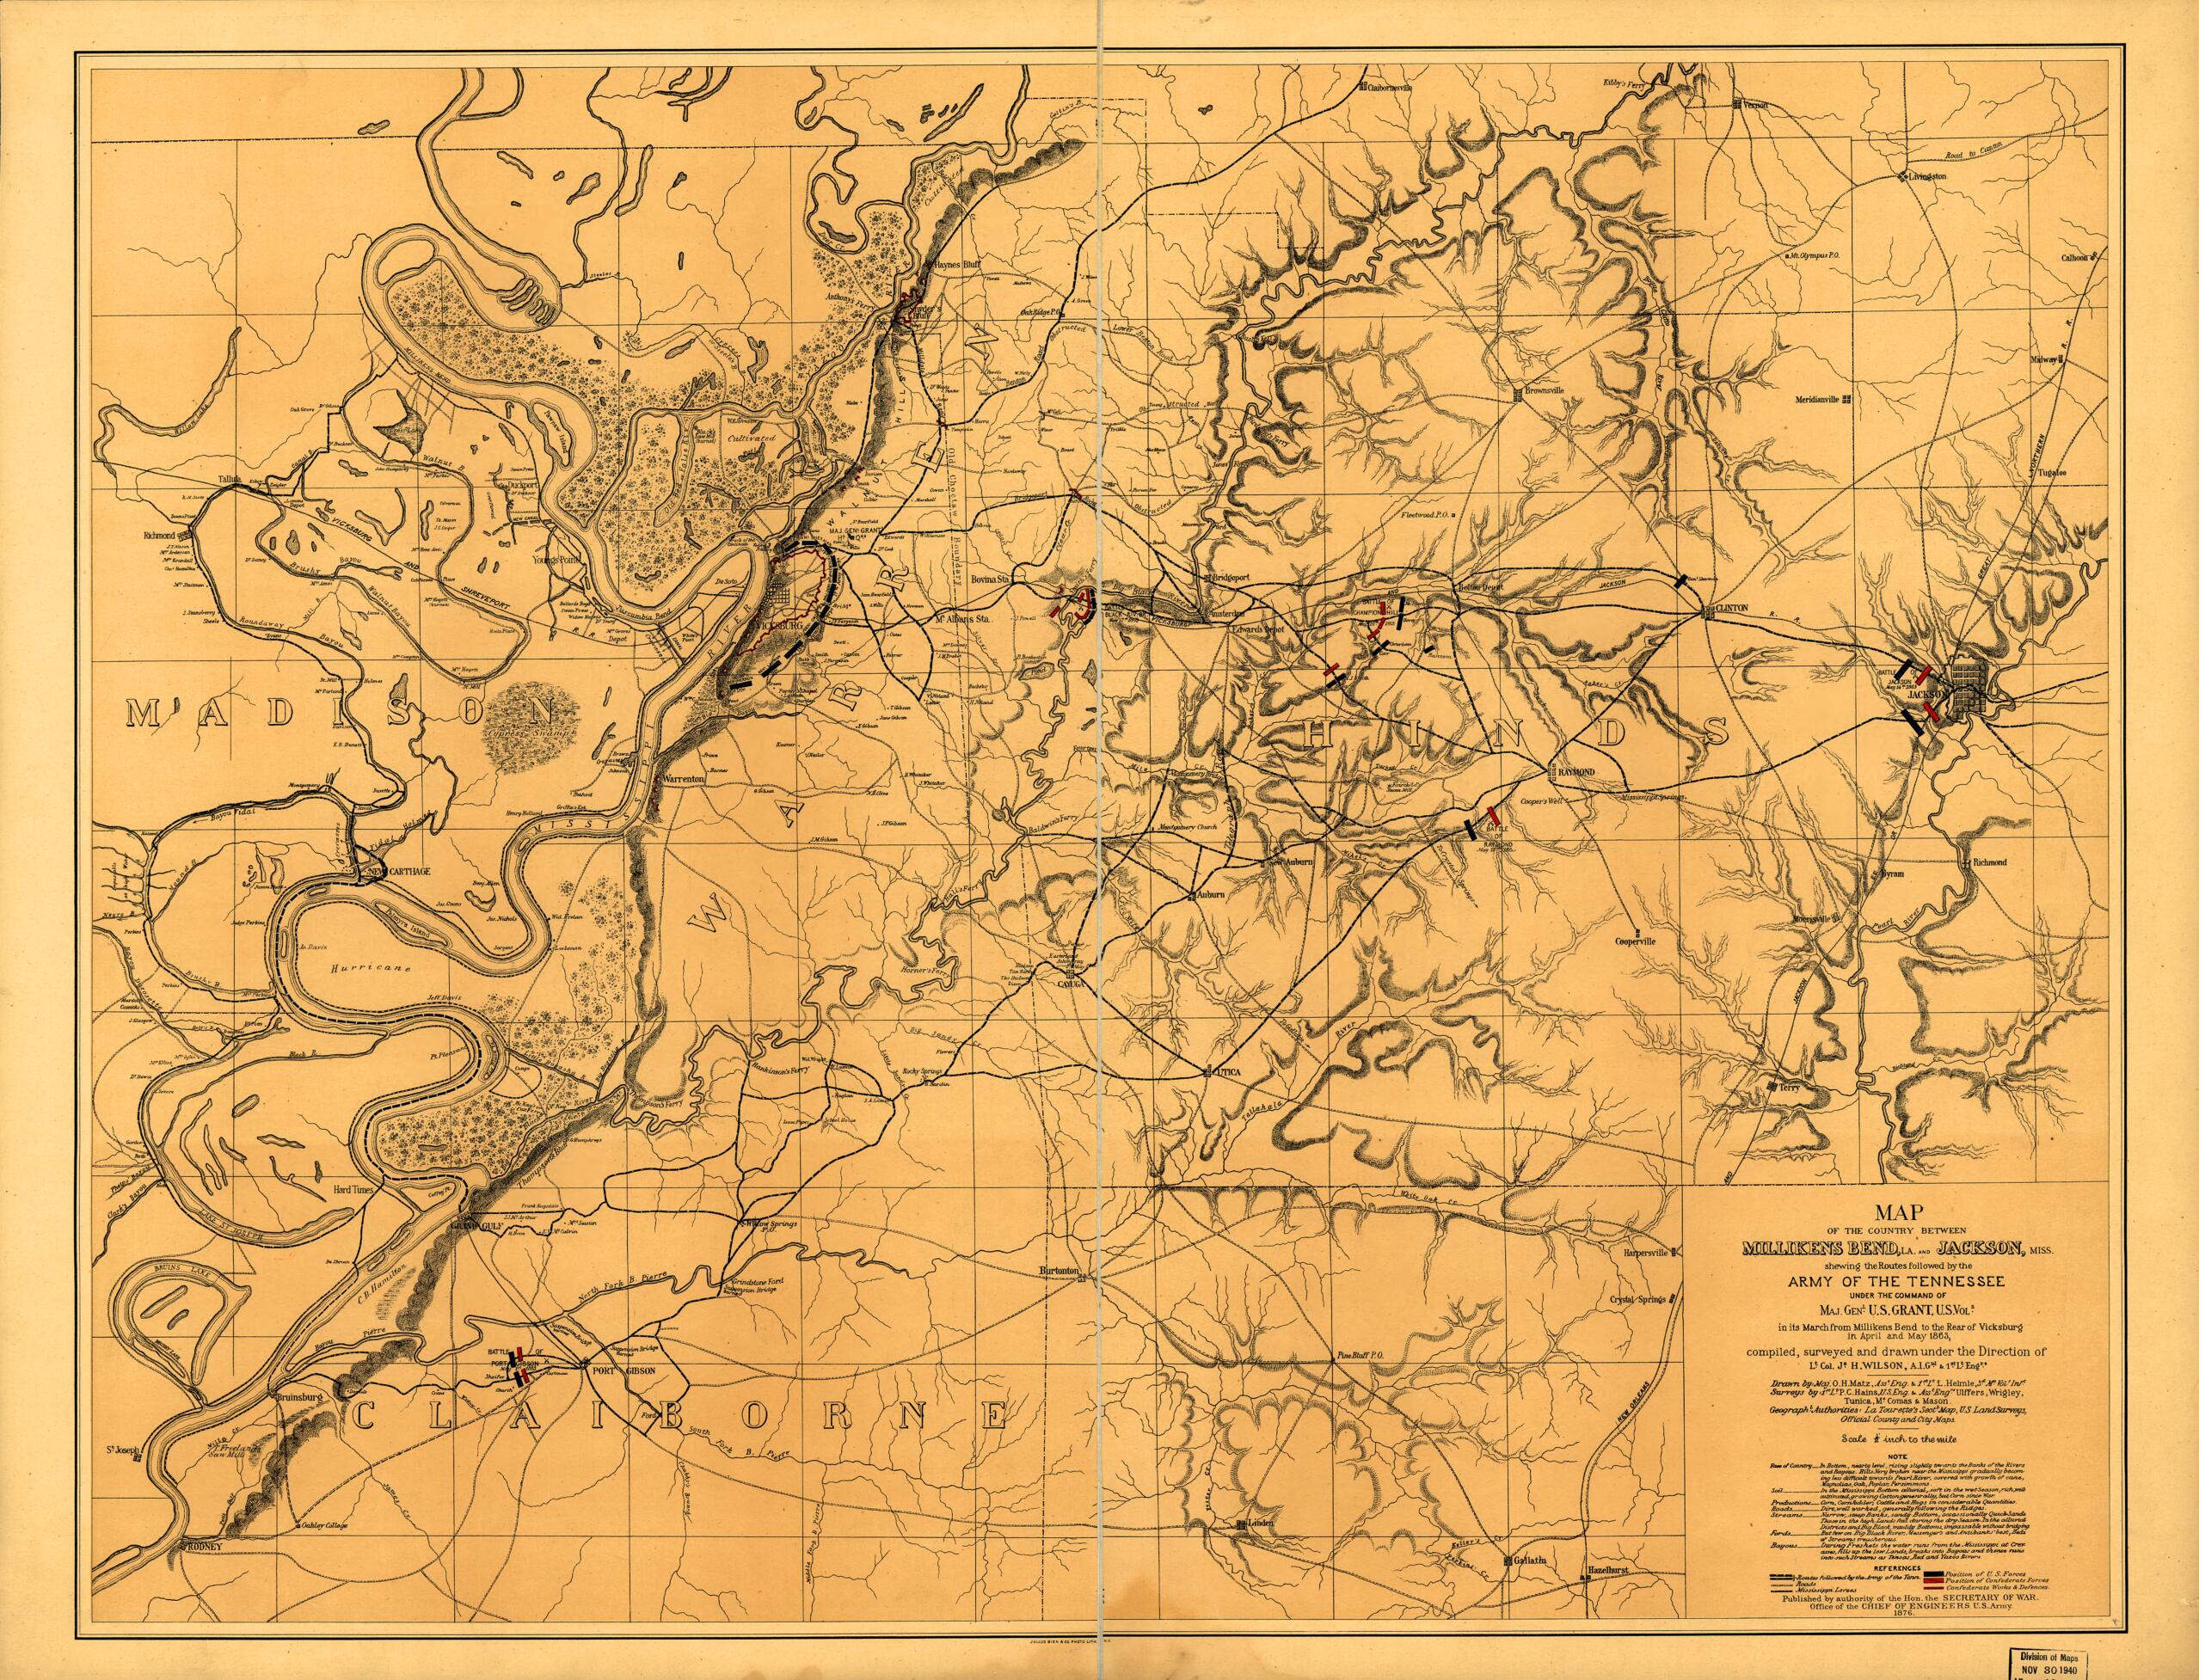 This old map of Map of the Country Between Millikens Bend, La. and Jackson, Mississippi Shewing the Routes Followed by the Army of the Tennessee Under the Command of Maj. Genl. U.S. Grant, U.S. Vols. In Its March from Millikens Bend to the Rear of Vicksb